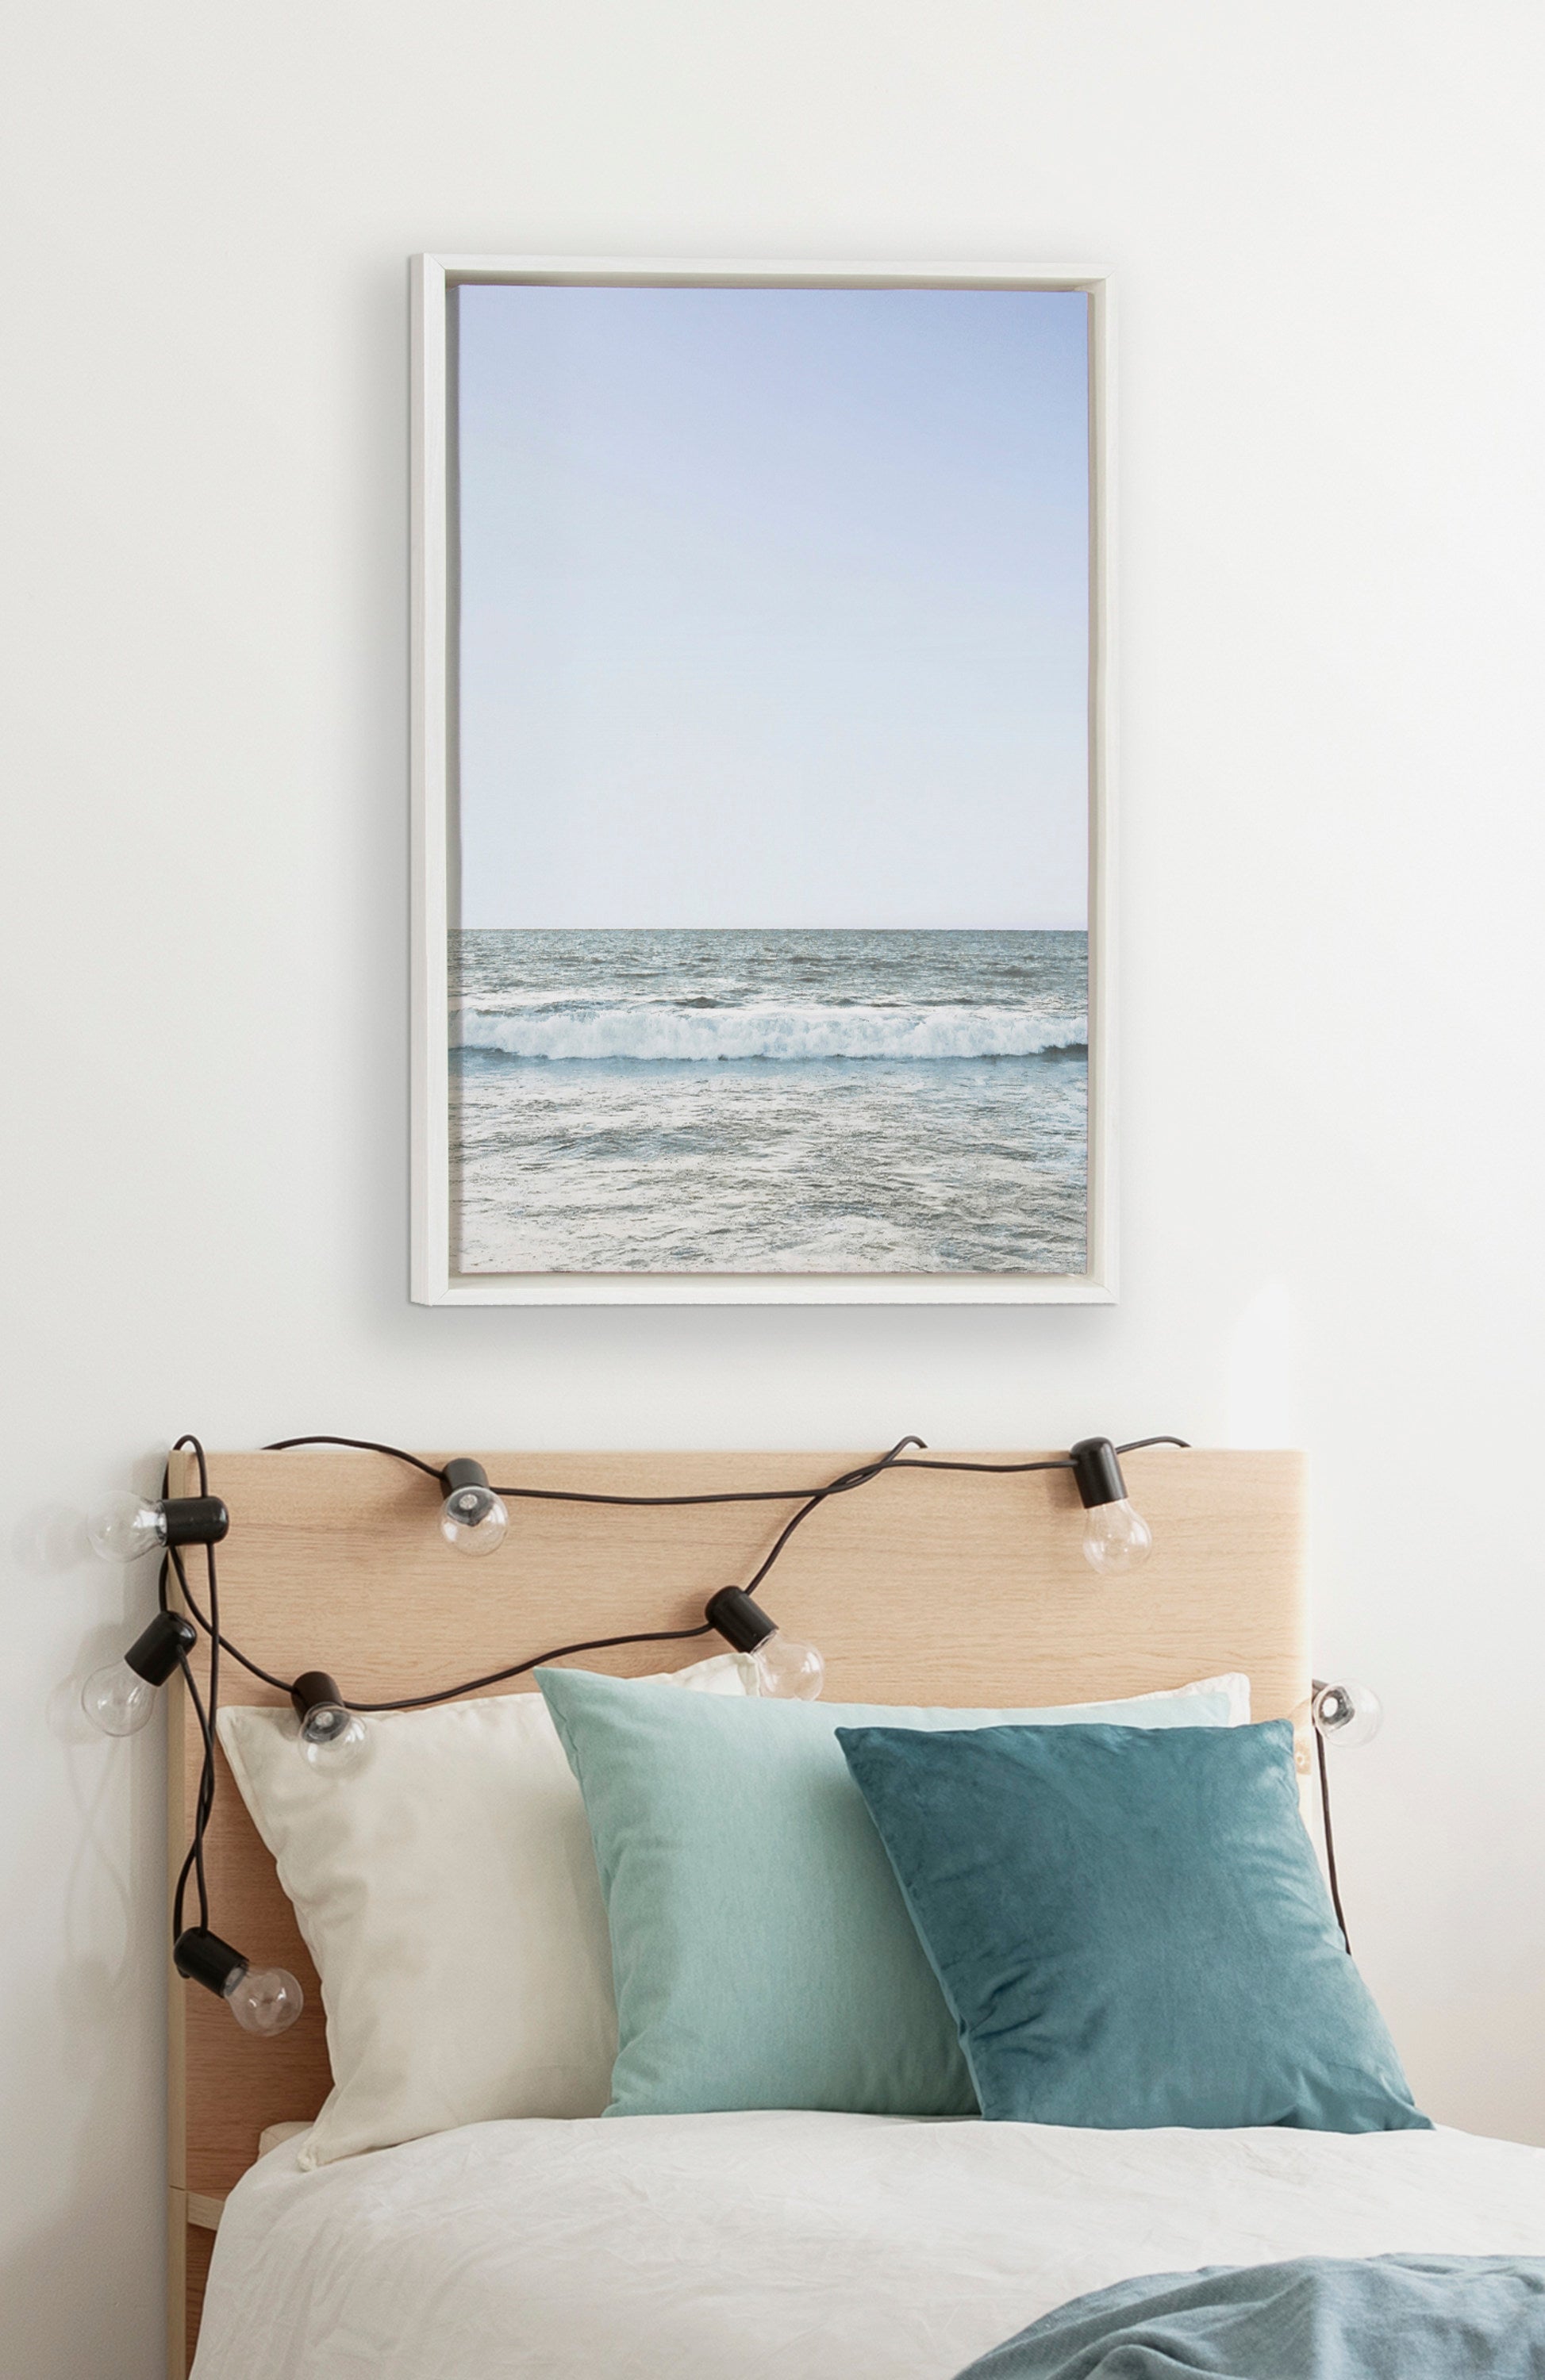 Sylvie Pale Blue Sea Framed Canvas by The Creative Bunch Studio